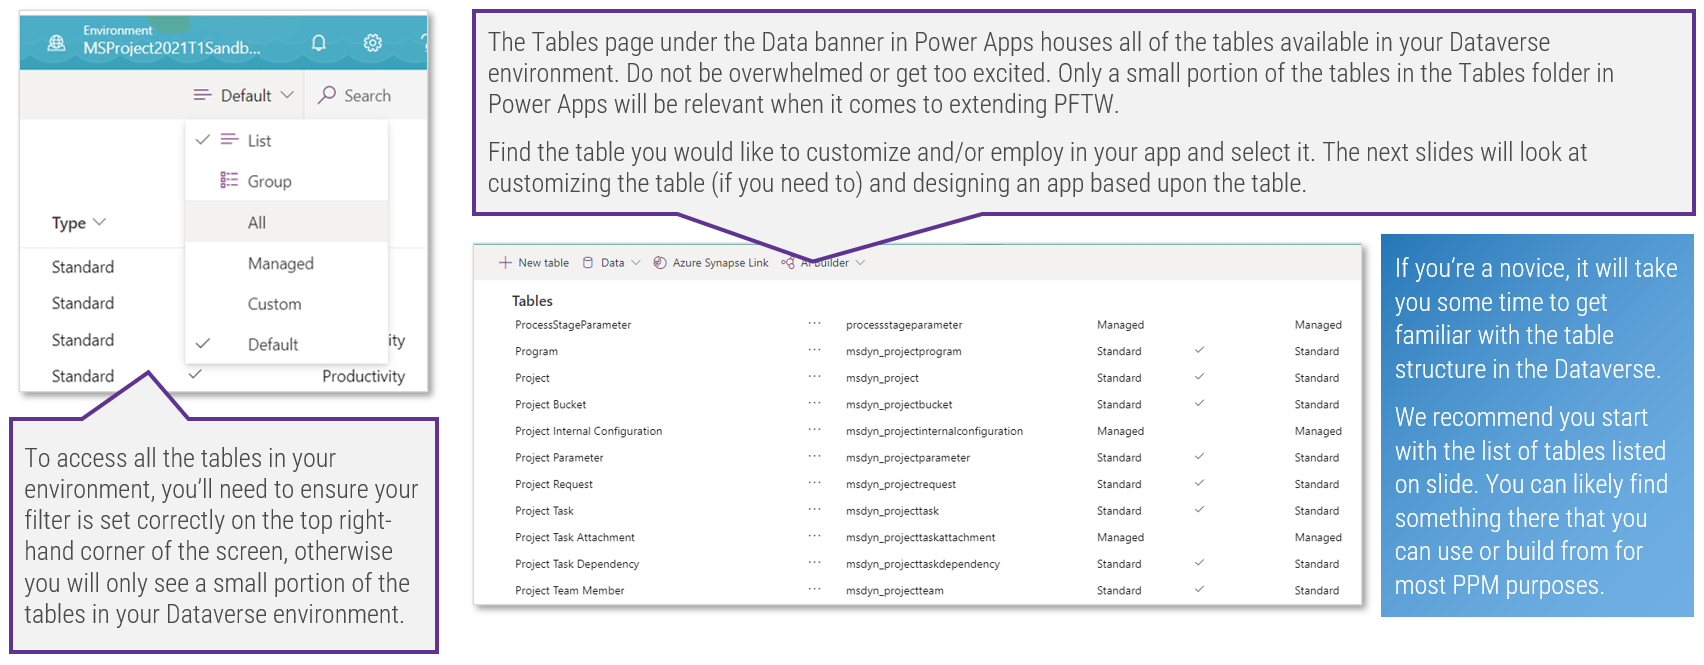 Screenshots of the tables search screen and the 'Tables' page under the 'Data' banner in 'Power Apps'.